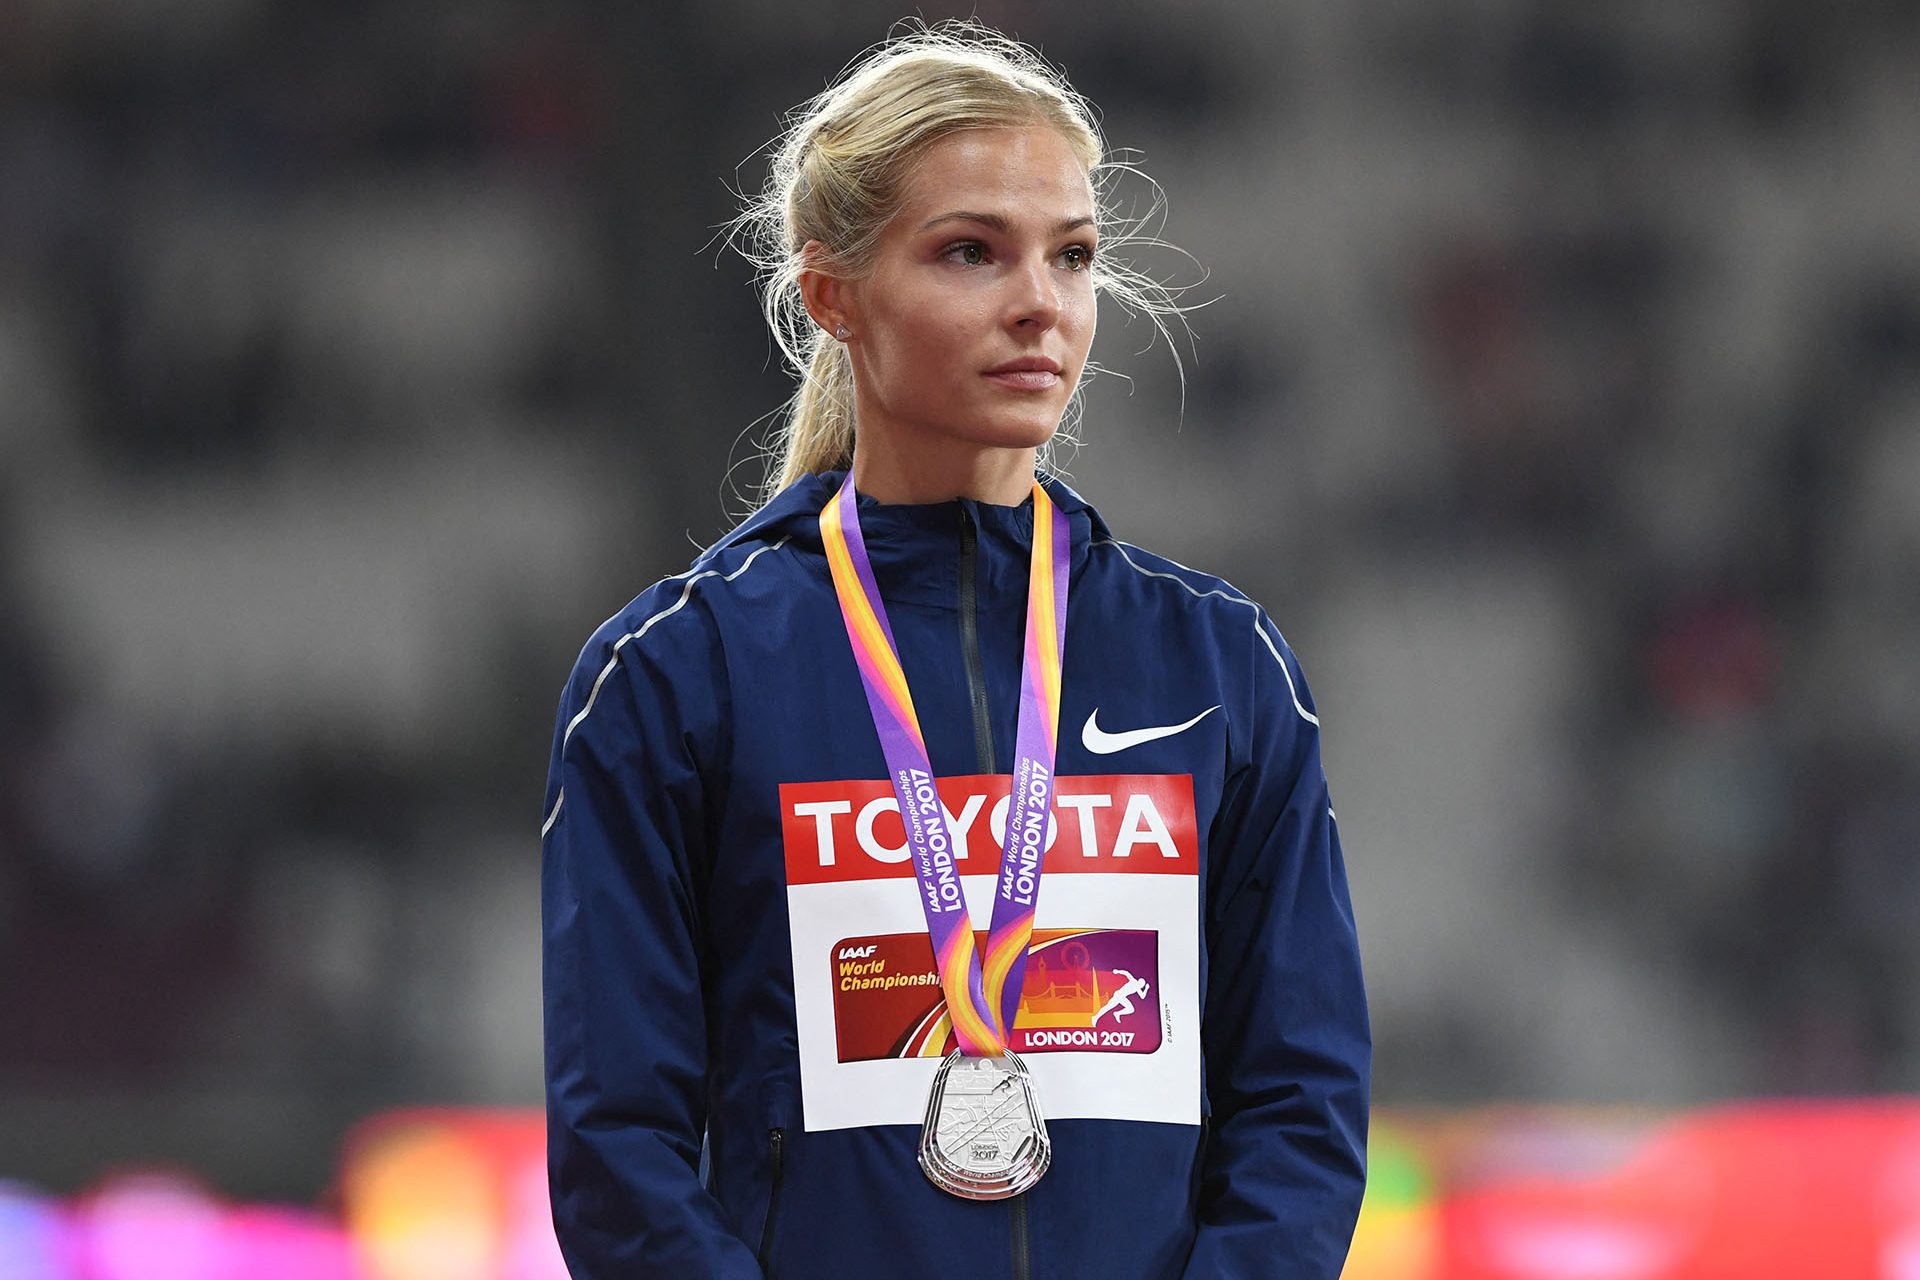 Silver at the 2017 World Championships in London